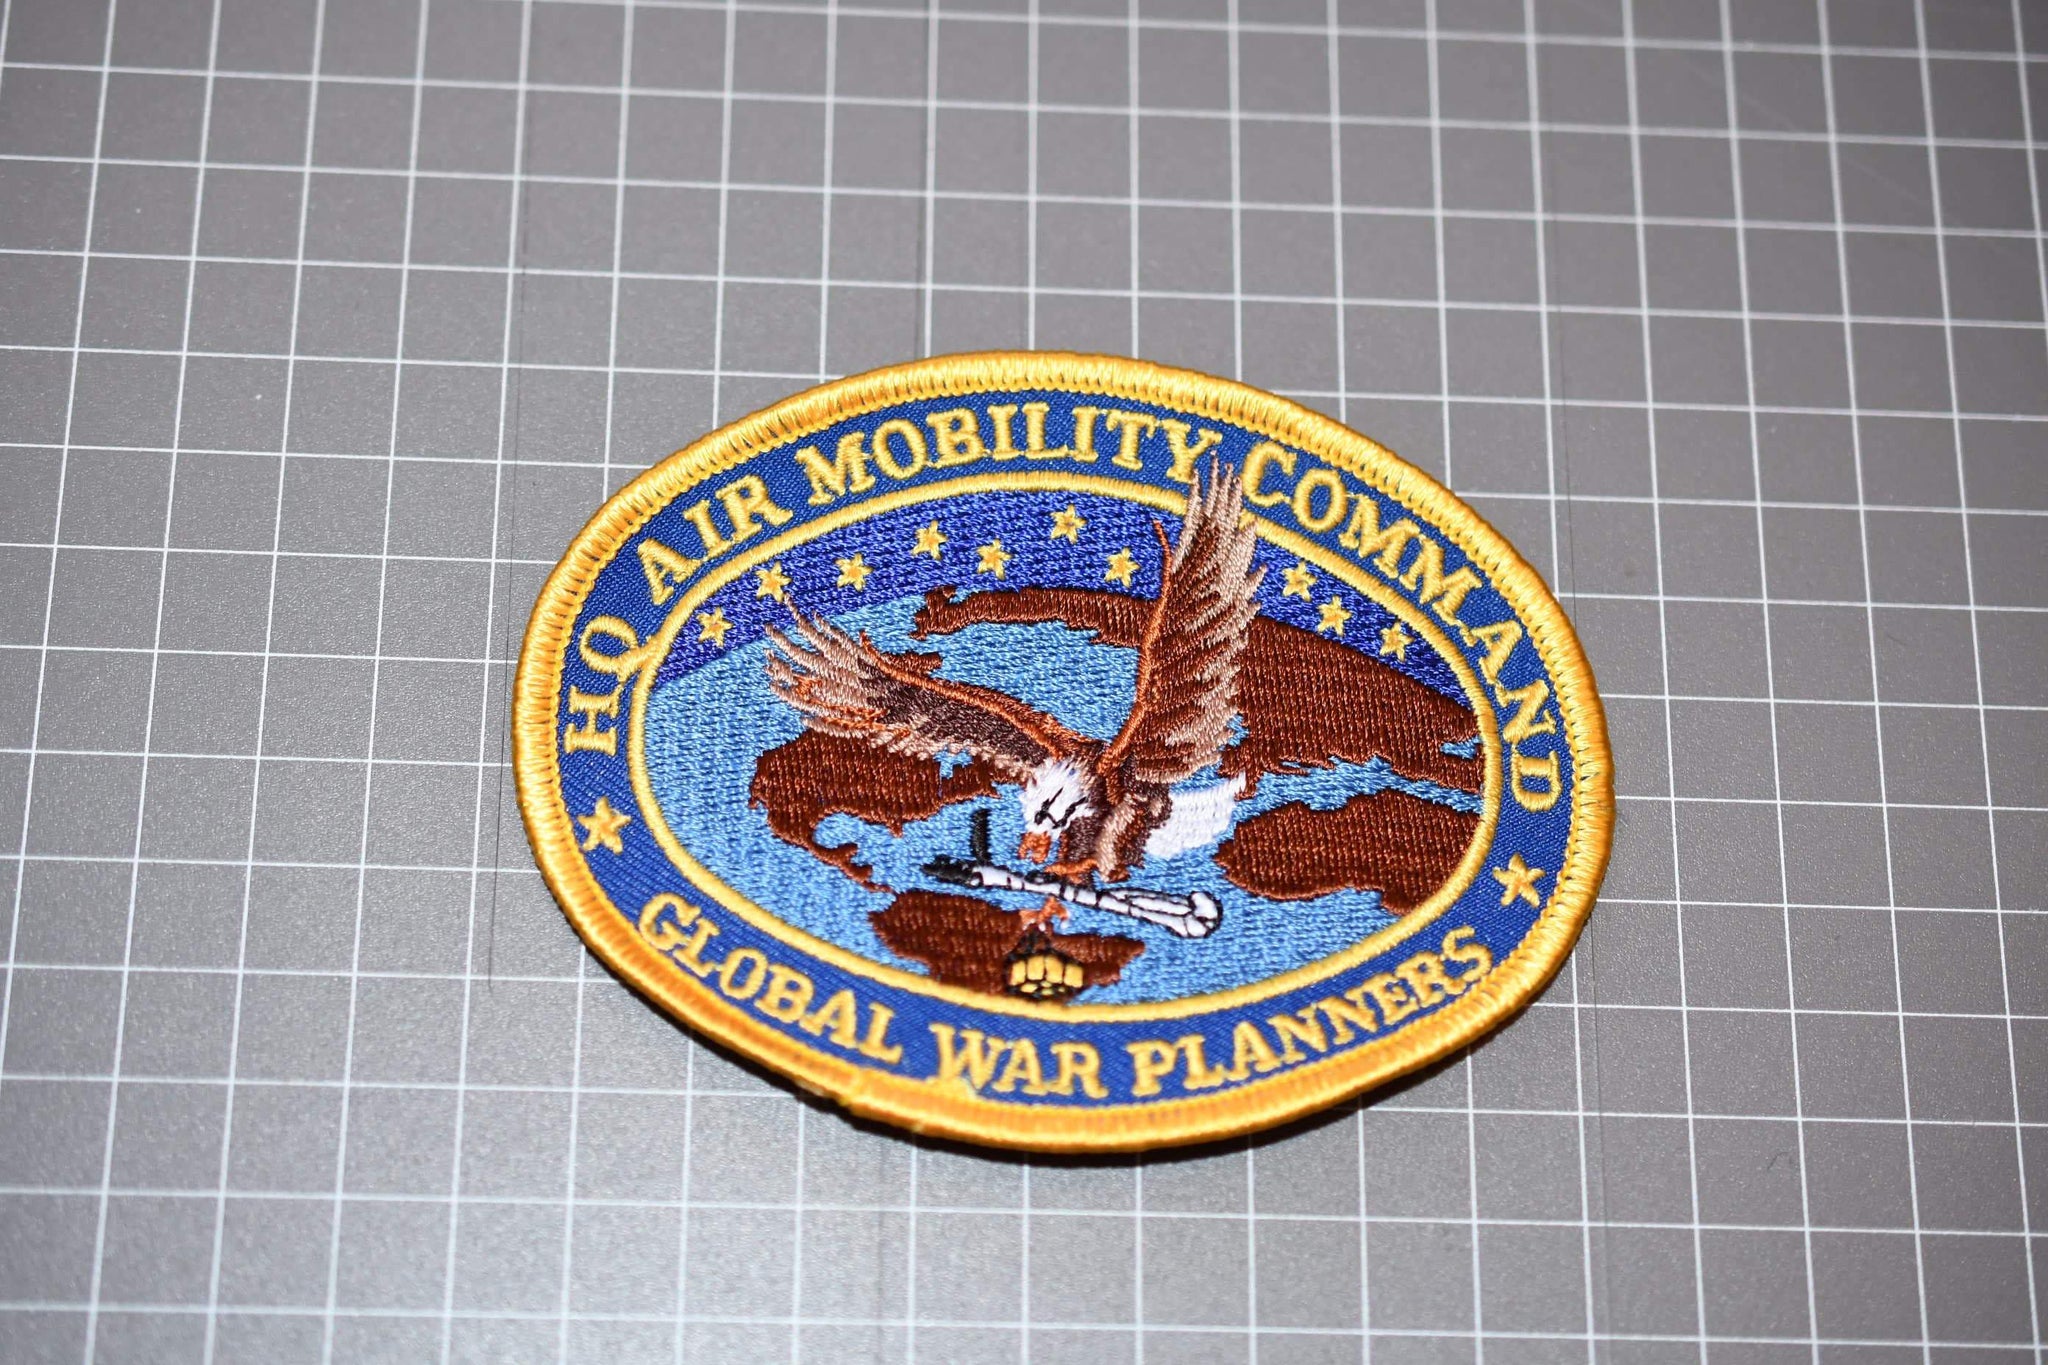 USAF H.Q. Air Mobility Command - Global War Planning Patch (B3)